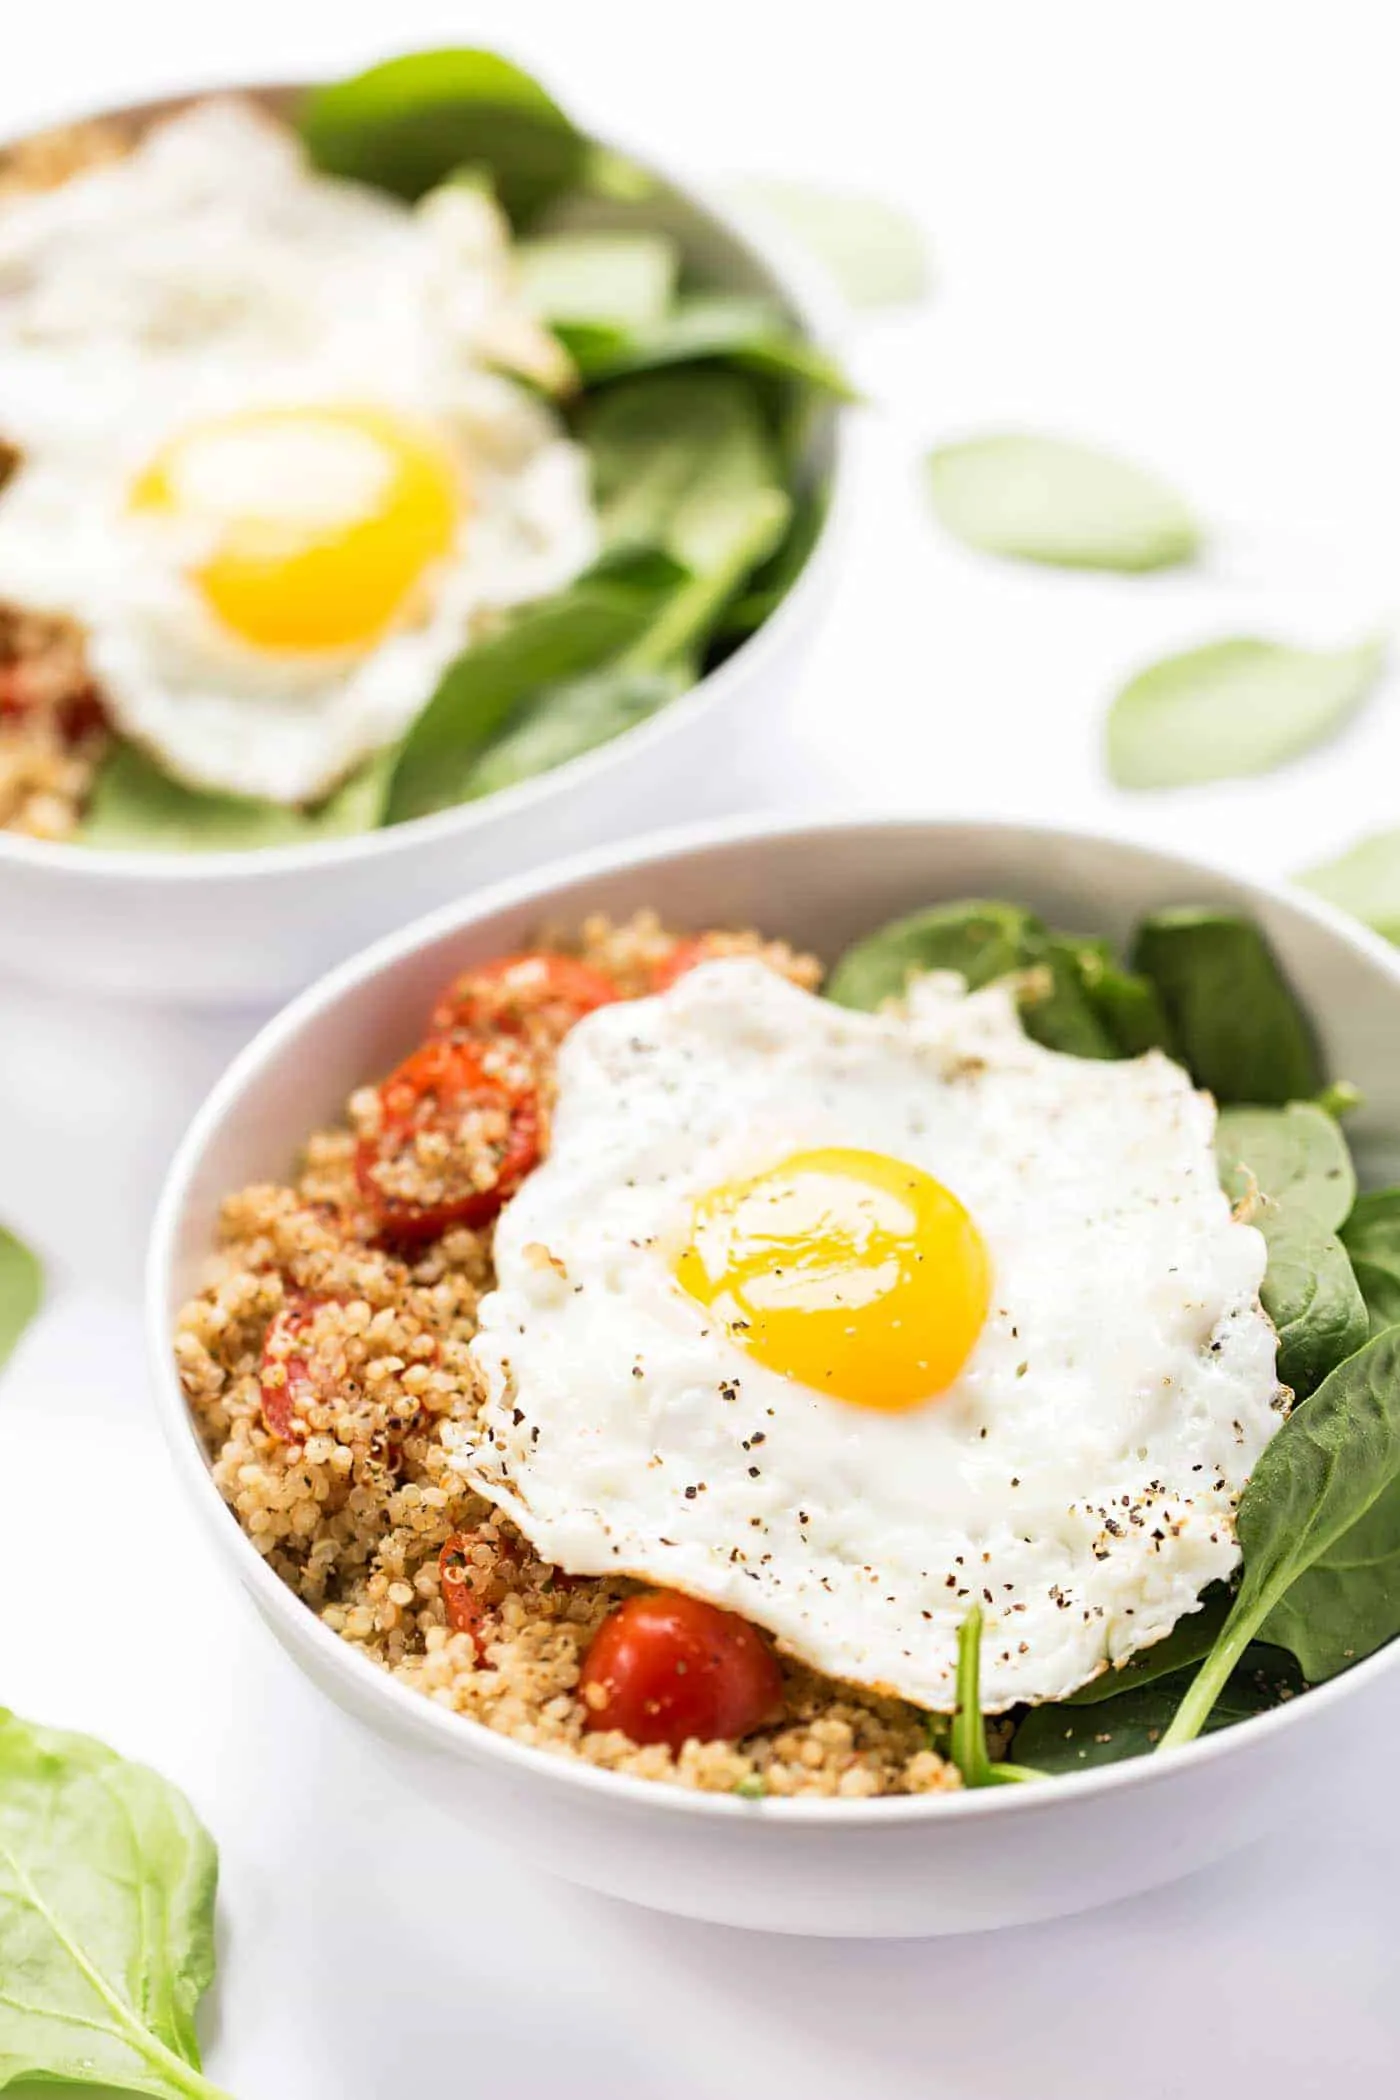 Savory Breakfast Quinoa Bowls with spinach, tomatoes and fried eggs on top!